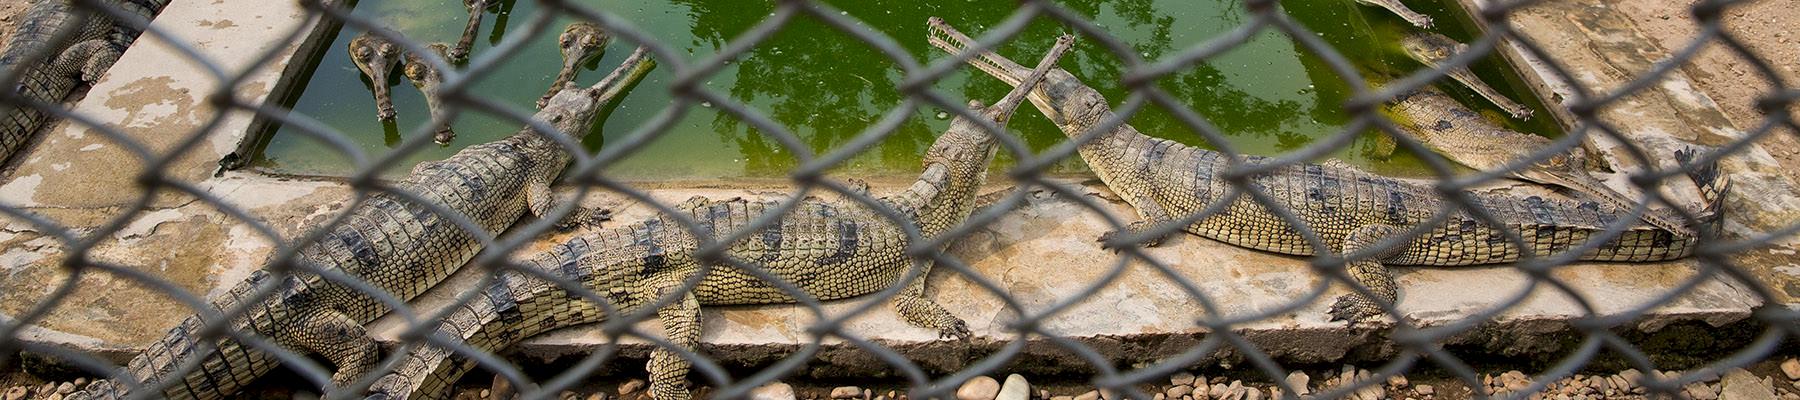 Captive Gharial's Gavialis gangeticus at the Royal Chitwan National Park and Gharial Breeding Center in Nepal © Karine Aigner / WWF-US